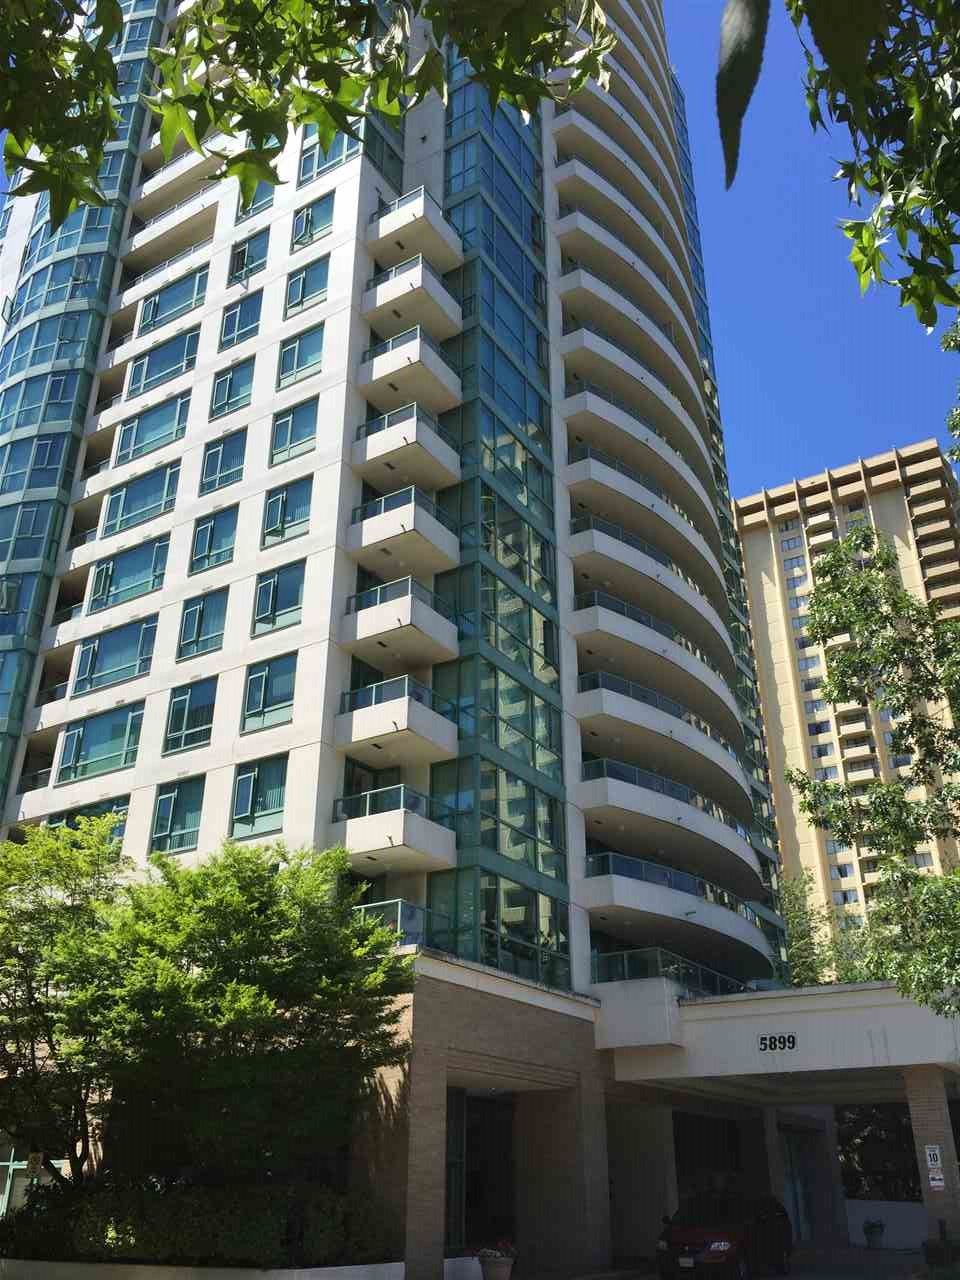 Main Photo: 702 5899 WILSON AVENUE in Burnaby: Central Park BS Condo for sale (Burnaby South)  : MLS®# R2086575